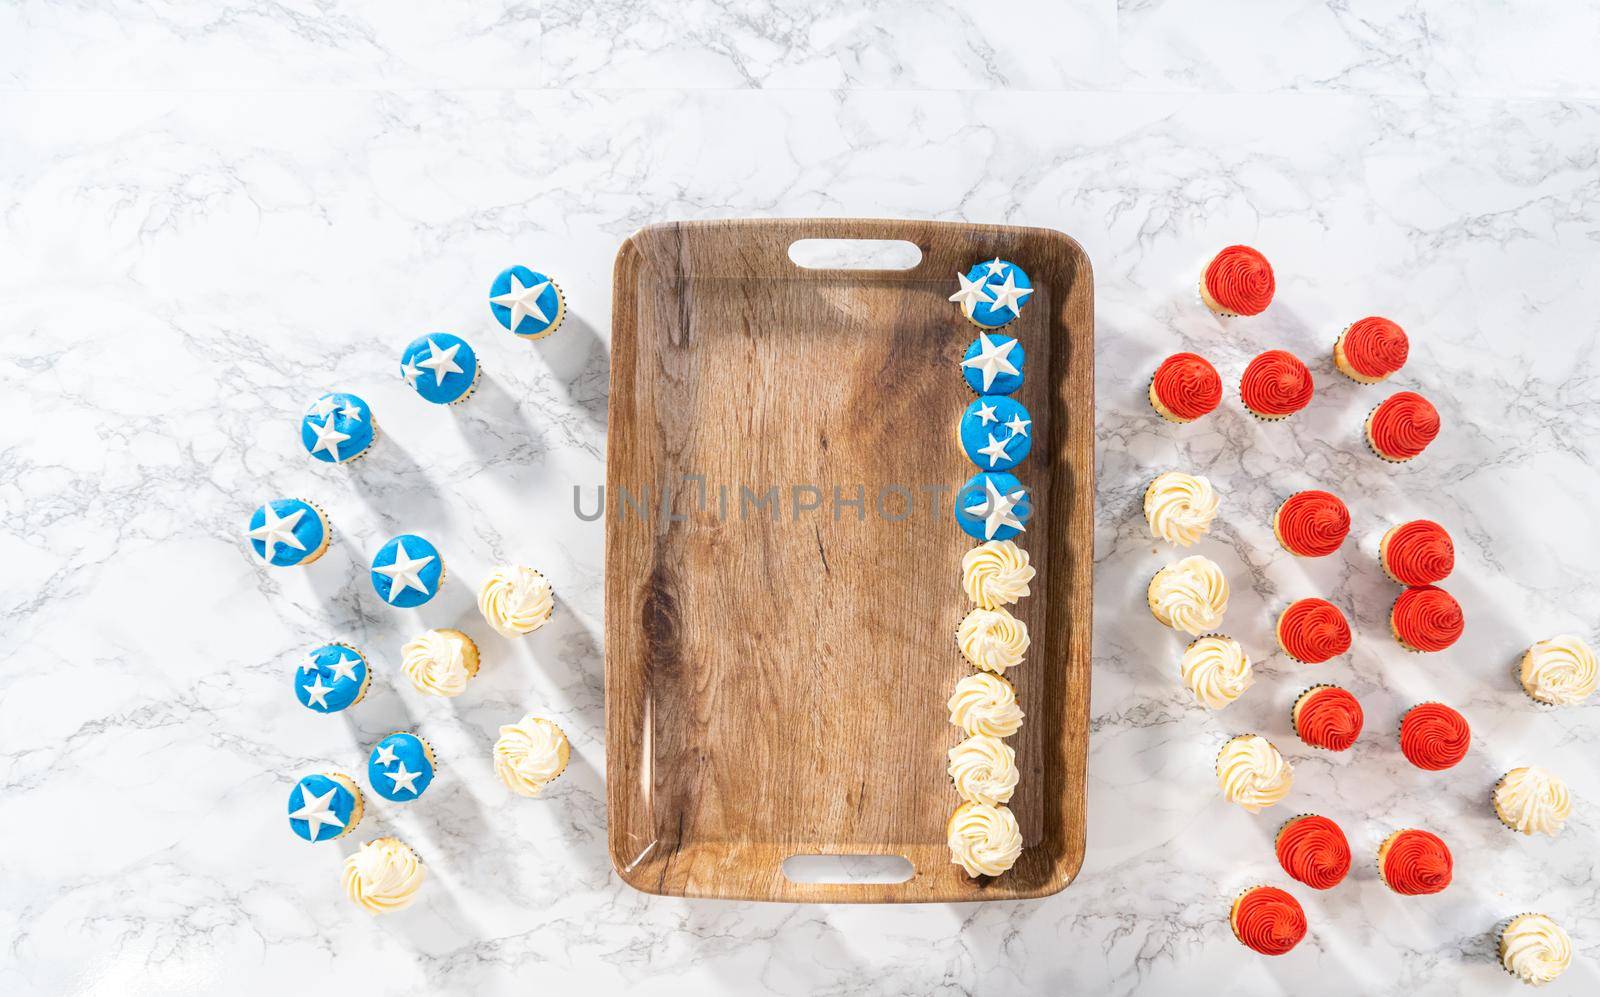 Flat lay. Arranging mini vanilla cupcakes in the shape of the American flag.